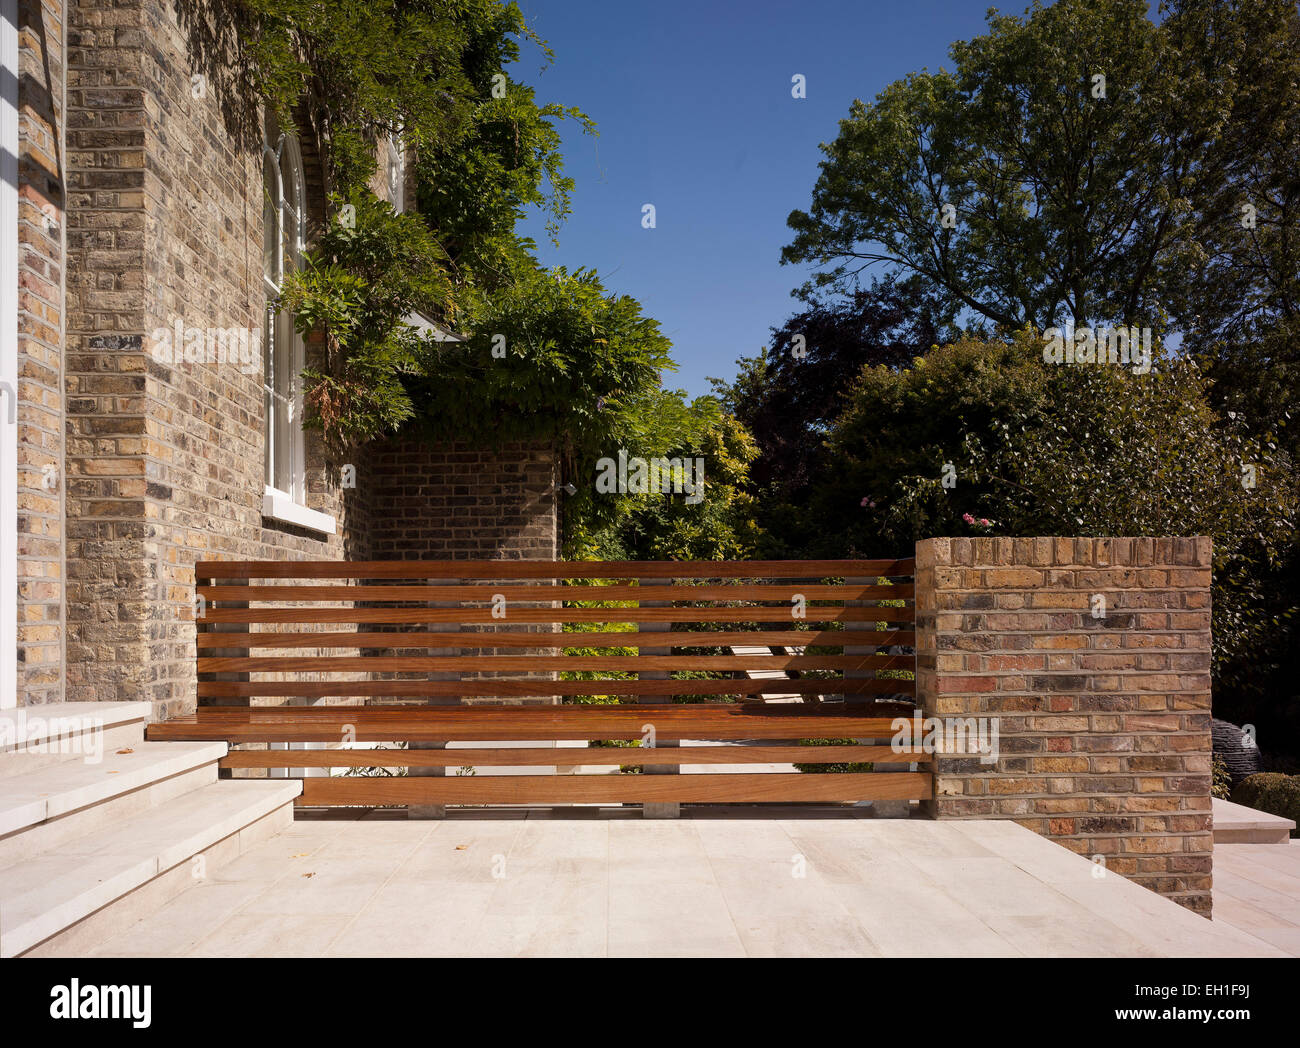 House in Shooters Hill, London, United Kingdom. Architect: Charles Barclay Architects, 2012. External stone terrace with timber Stock Photo